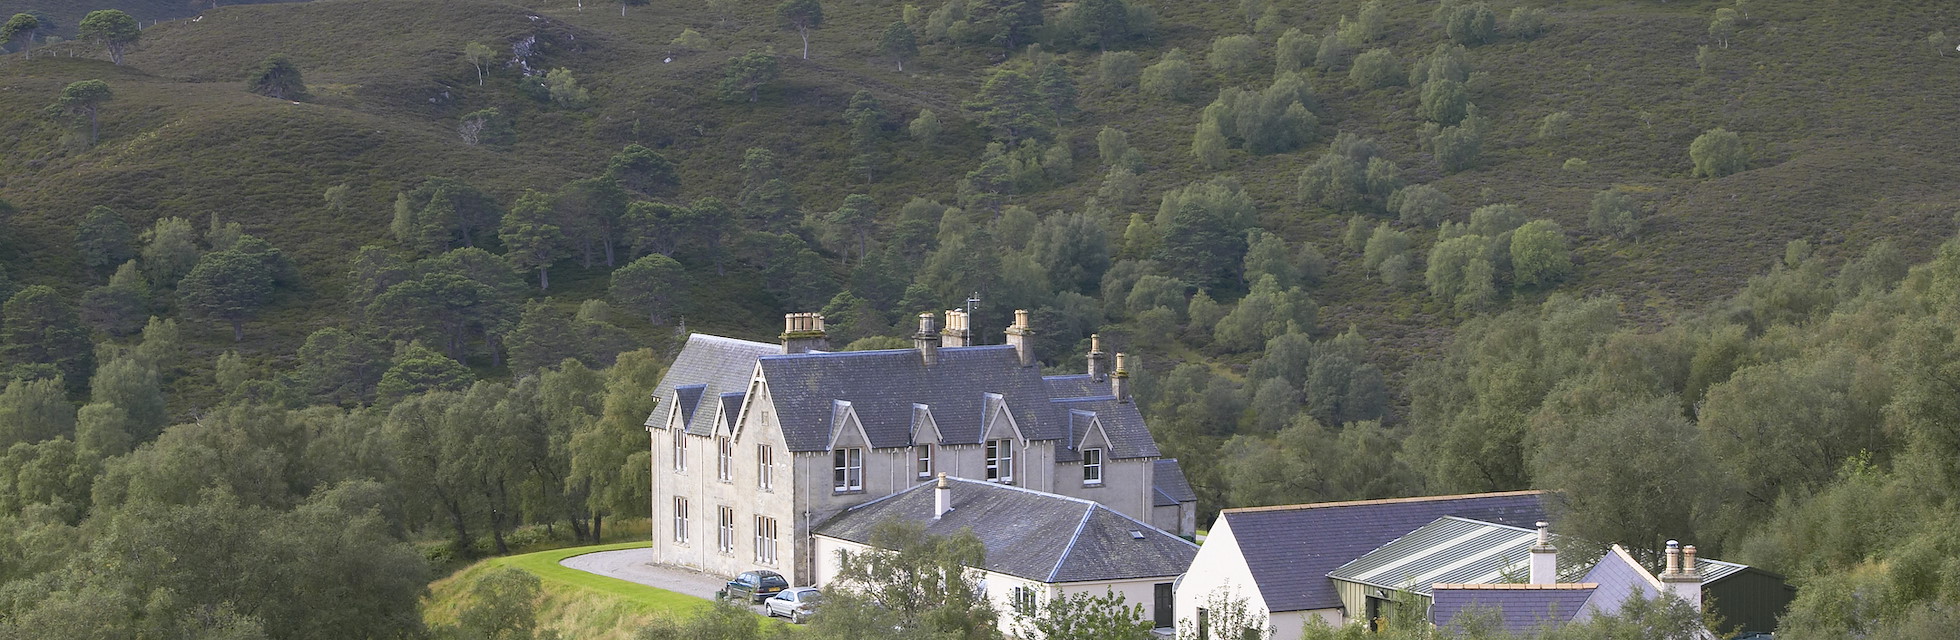 Alladale Wilderness Reserve in northern Scotland fuels an extensive habitat restoration programme with revenue from its range of luxury accommodations.